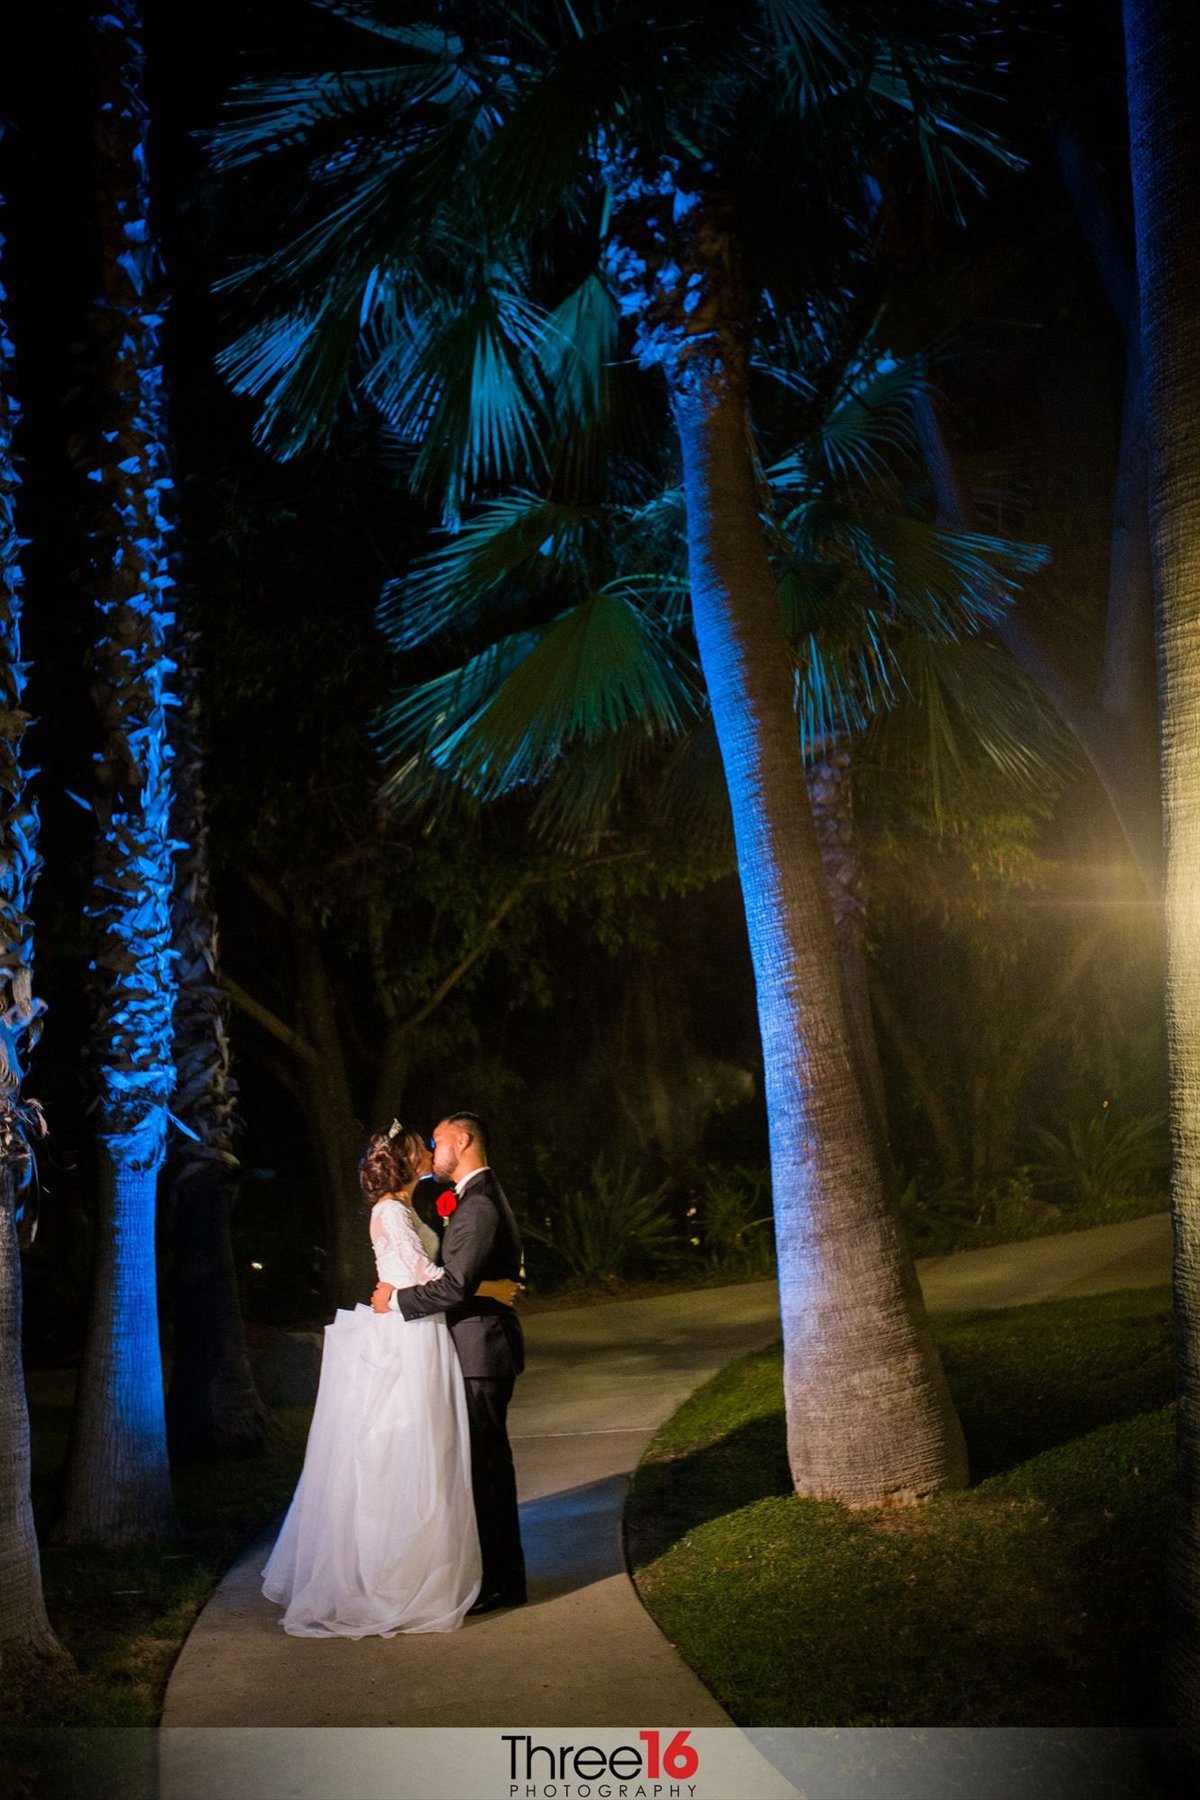 Intimate kiss between newly married couple at night